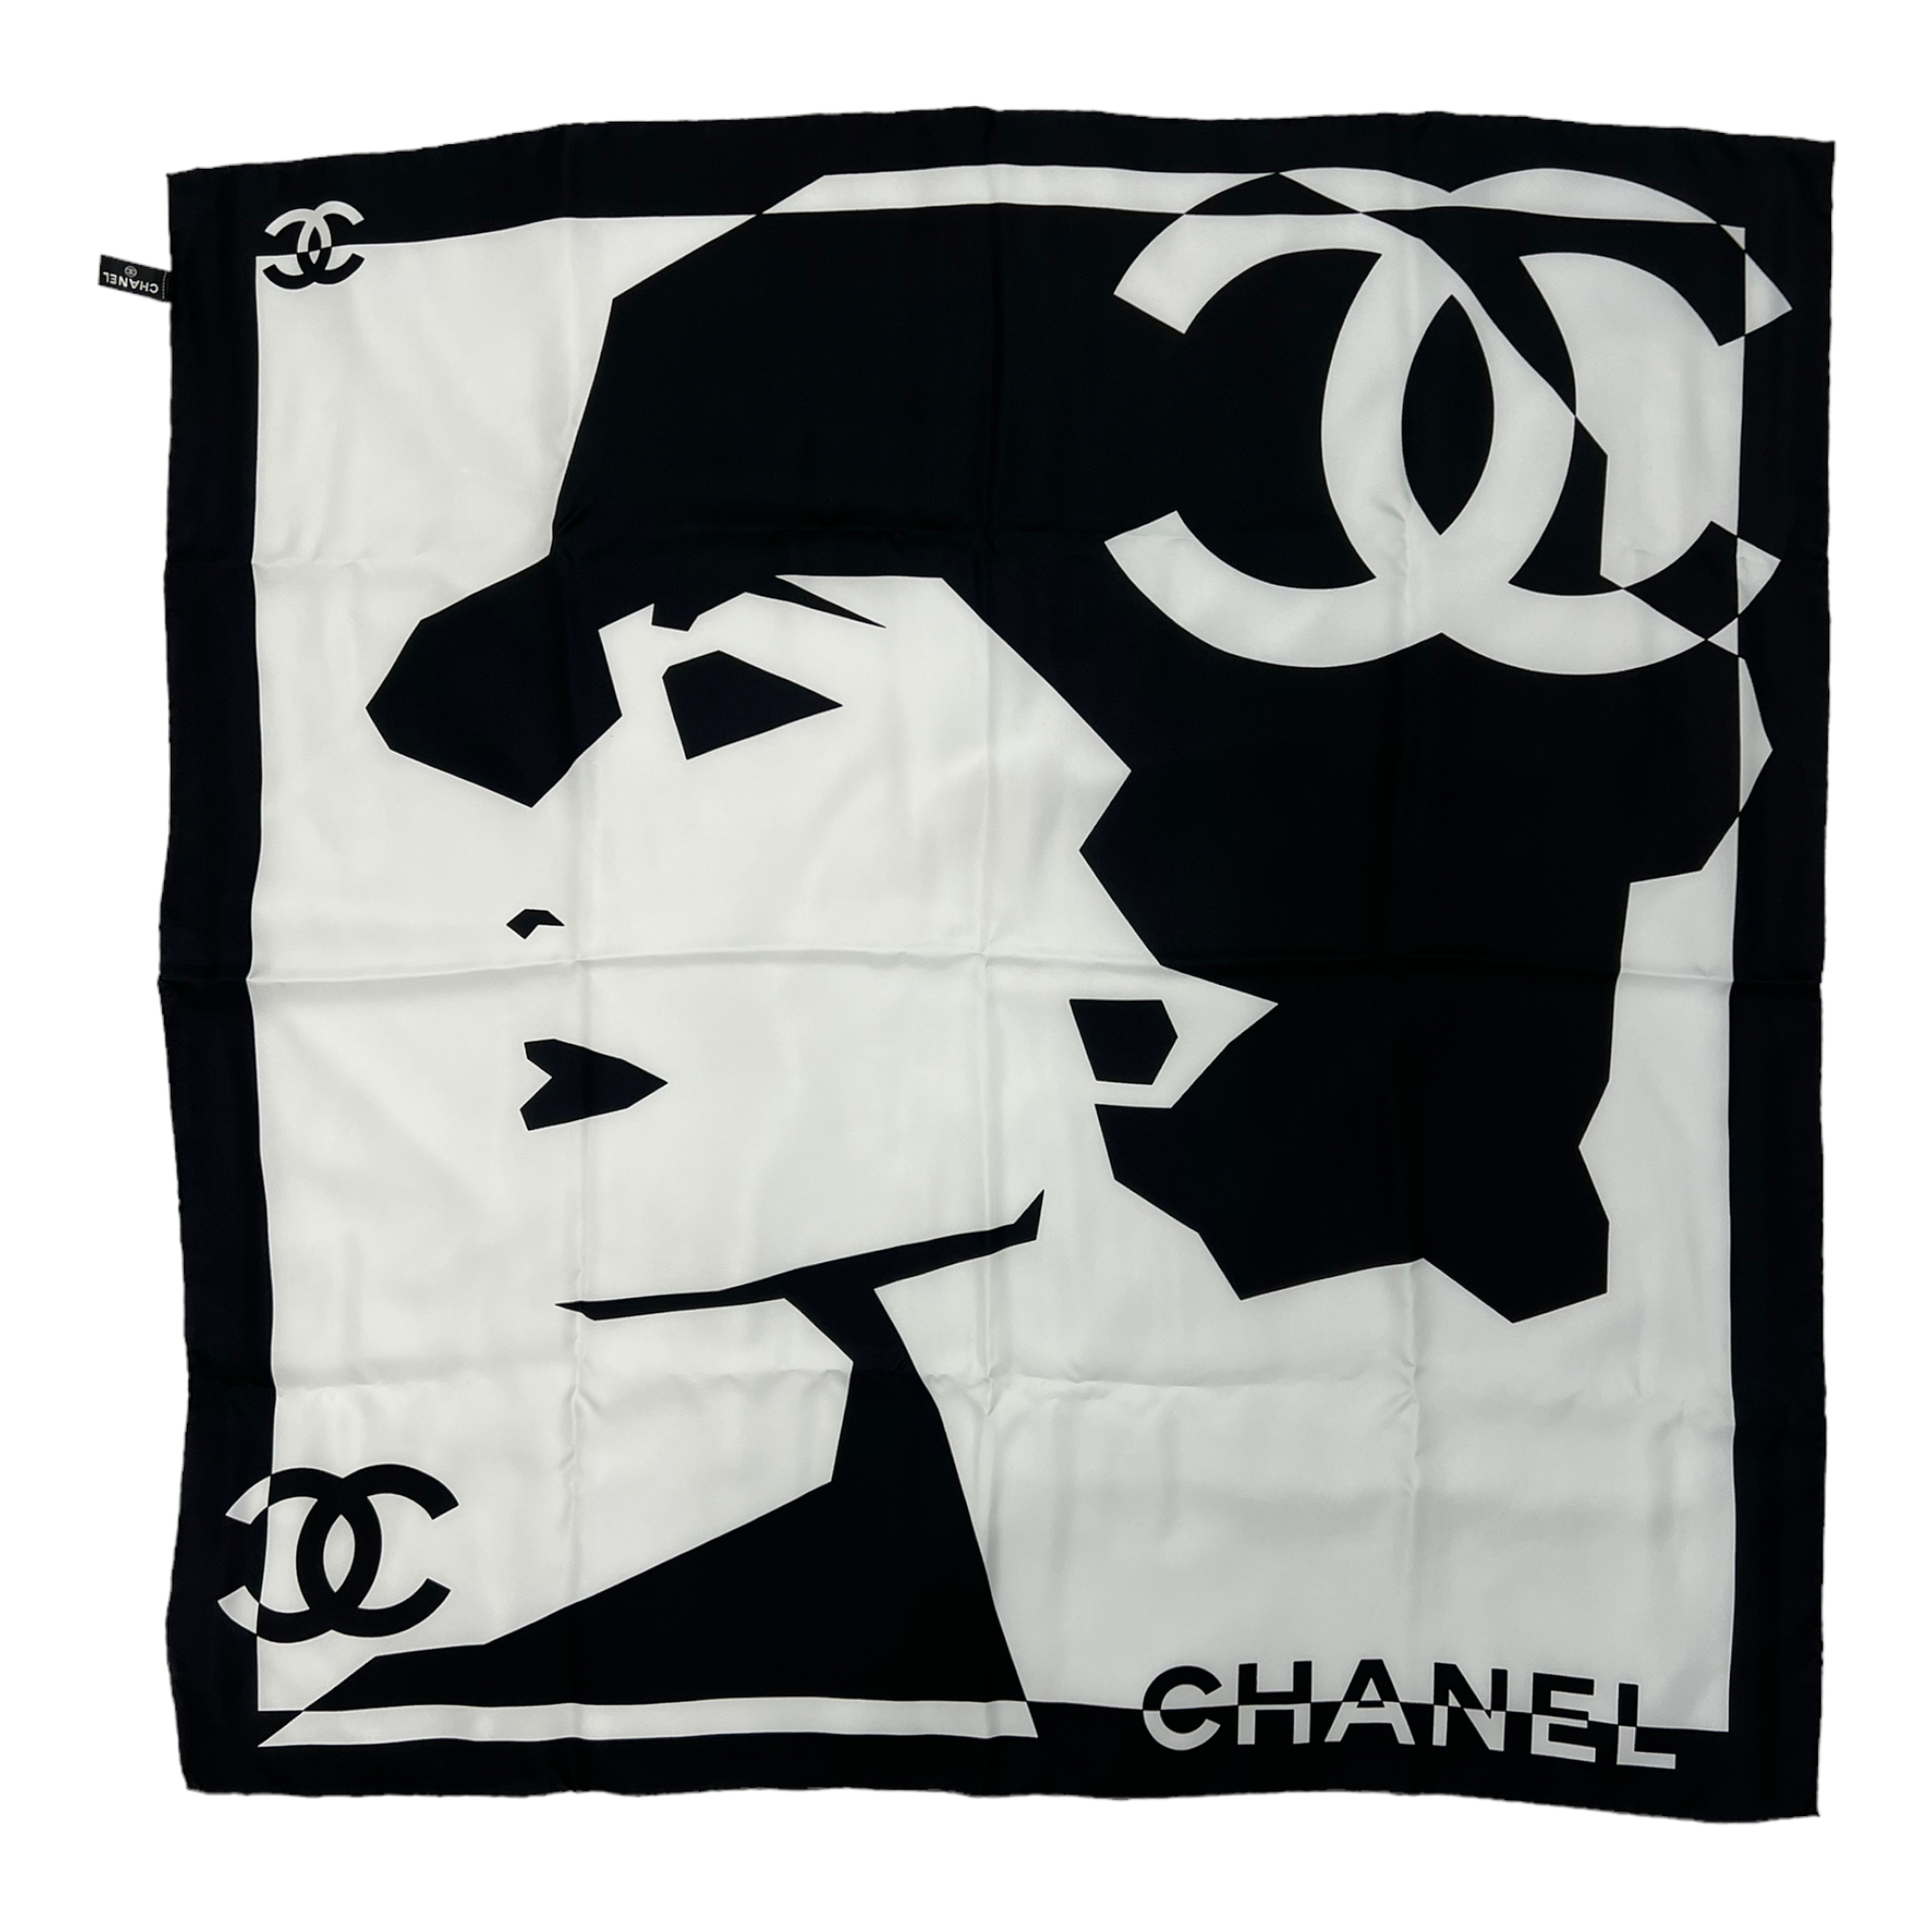 In celebration of Gabrielle Chanel the new fragrance and iconic designer